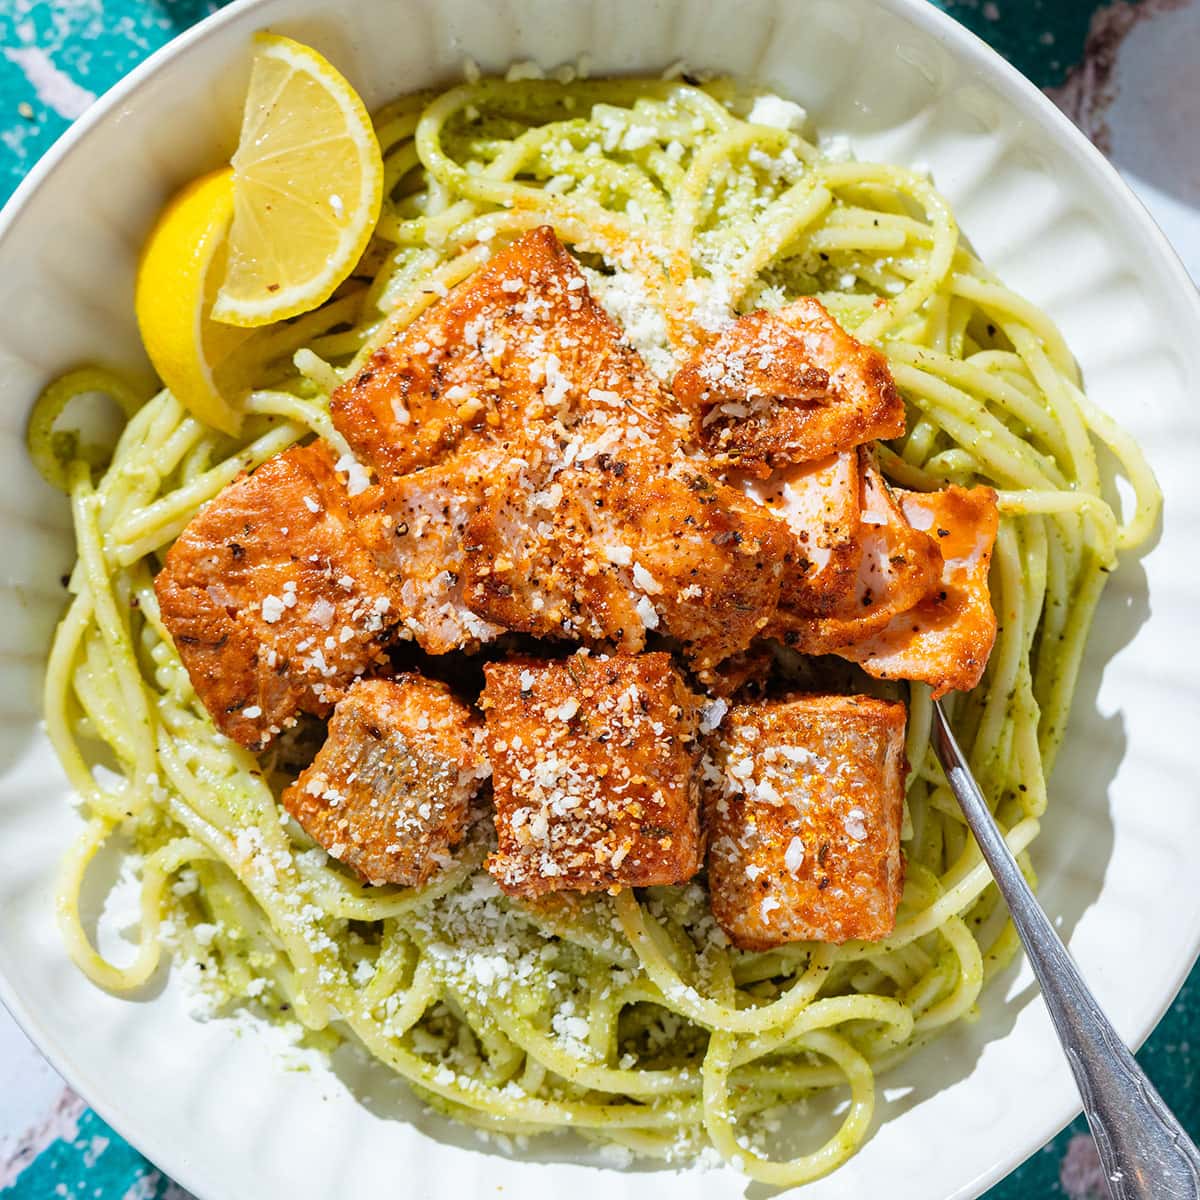 This Salmon Pesto Pasta requires minimal effort and you can have it ready on the table in just 30 minutes! Serve it as it is or with a side salad. #salmonpestopasta thehealthfulideas.com/salmon-pesto-p…